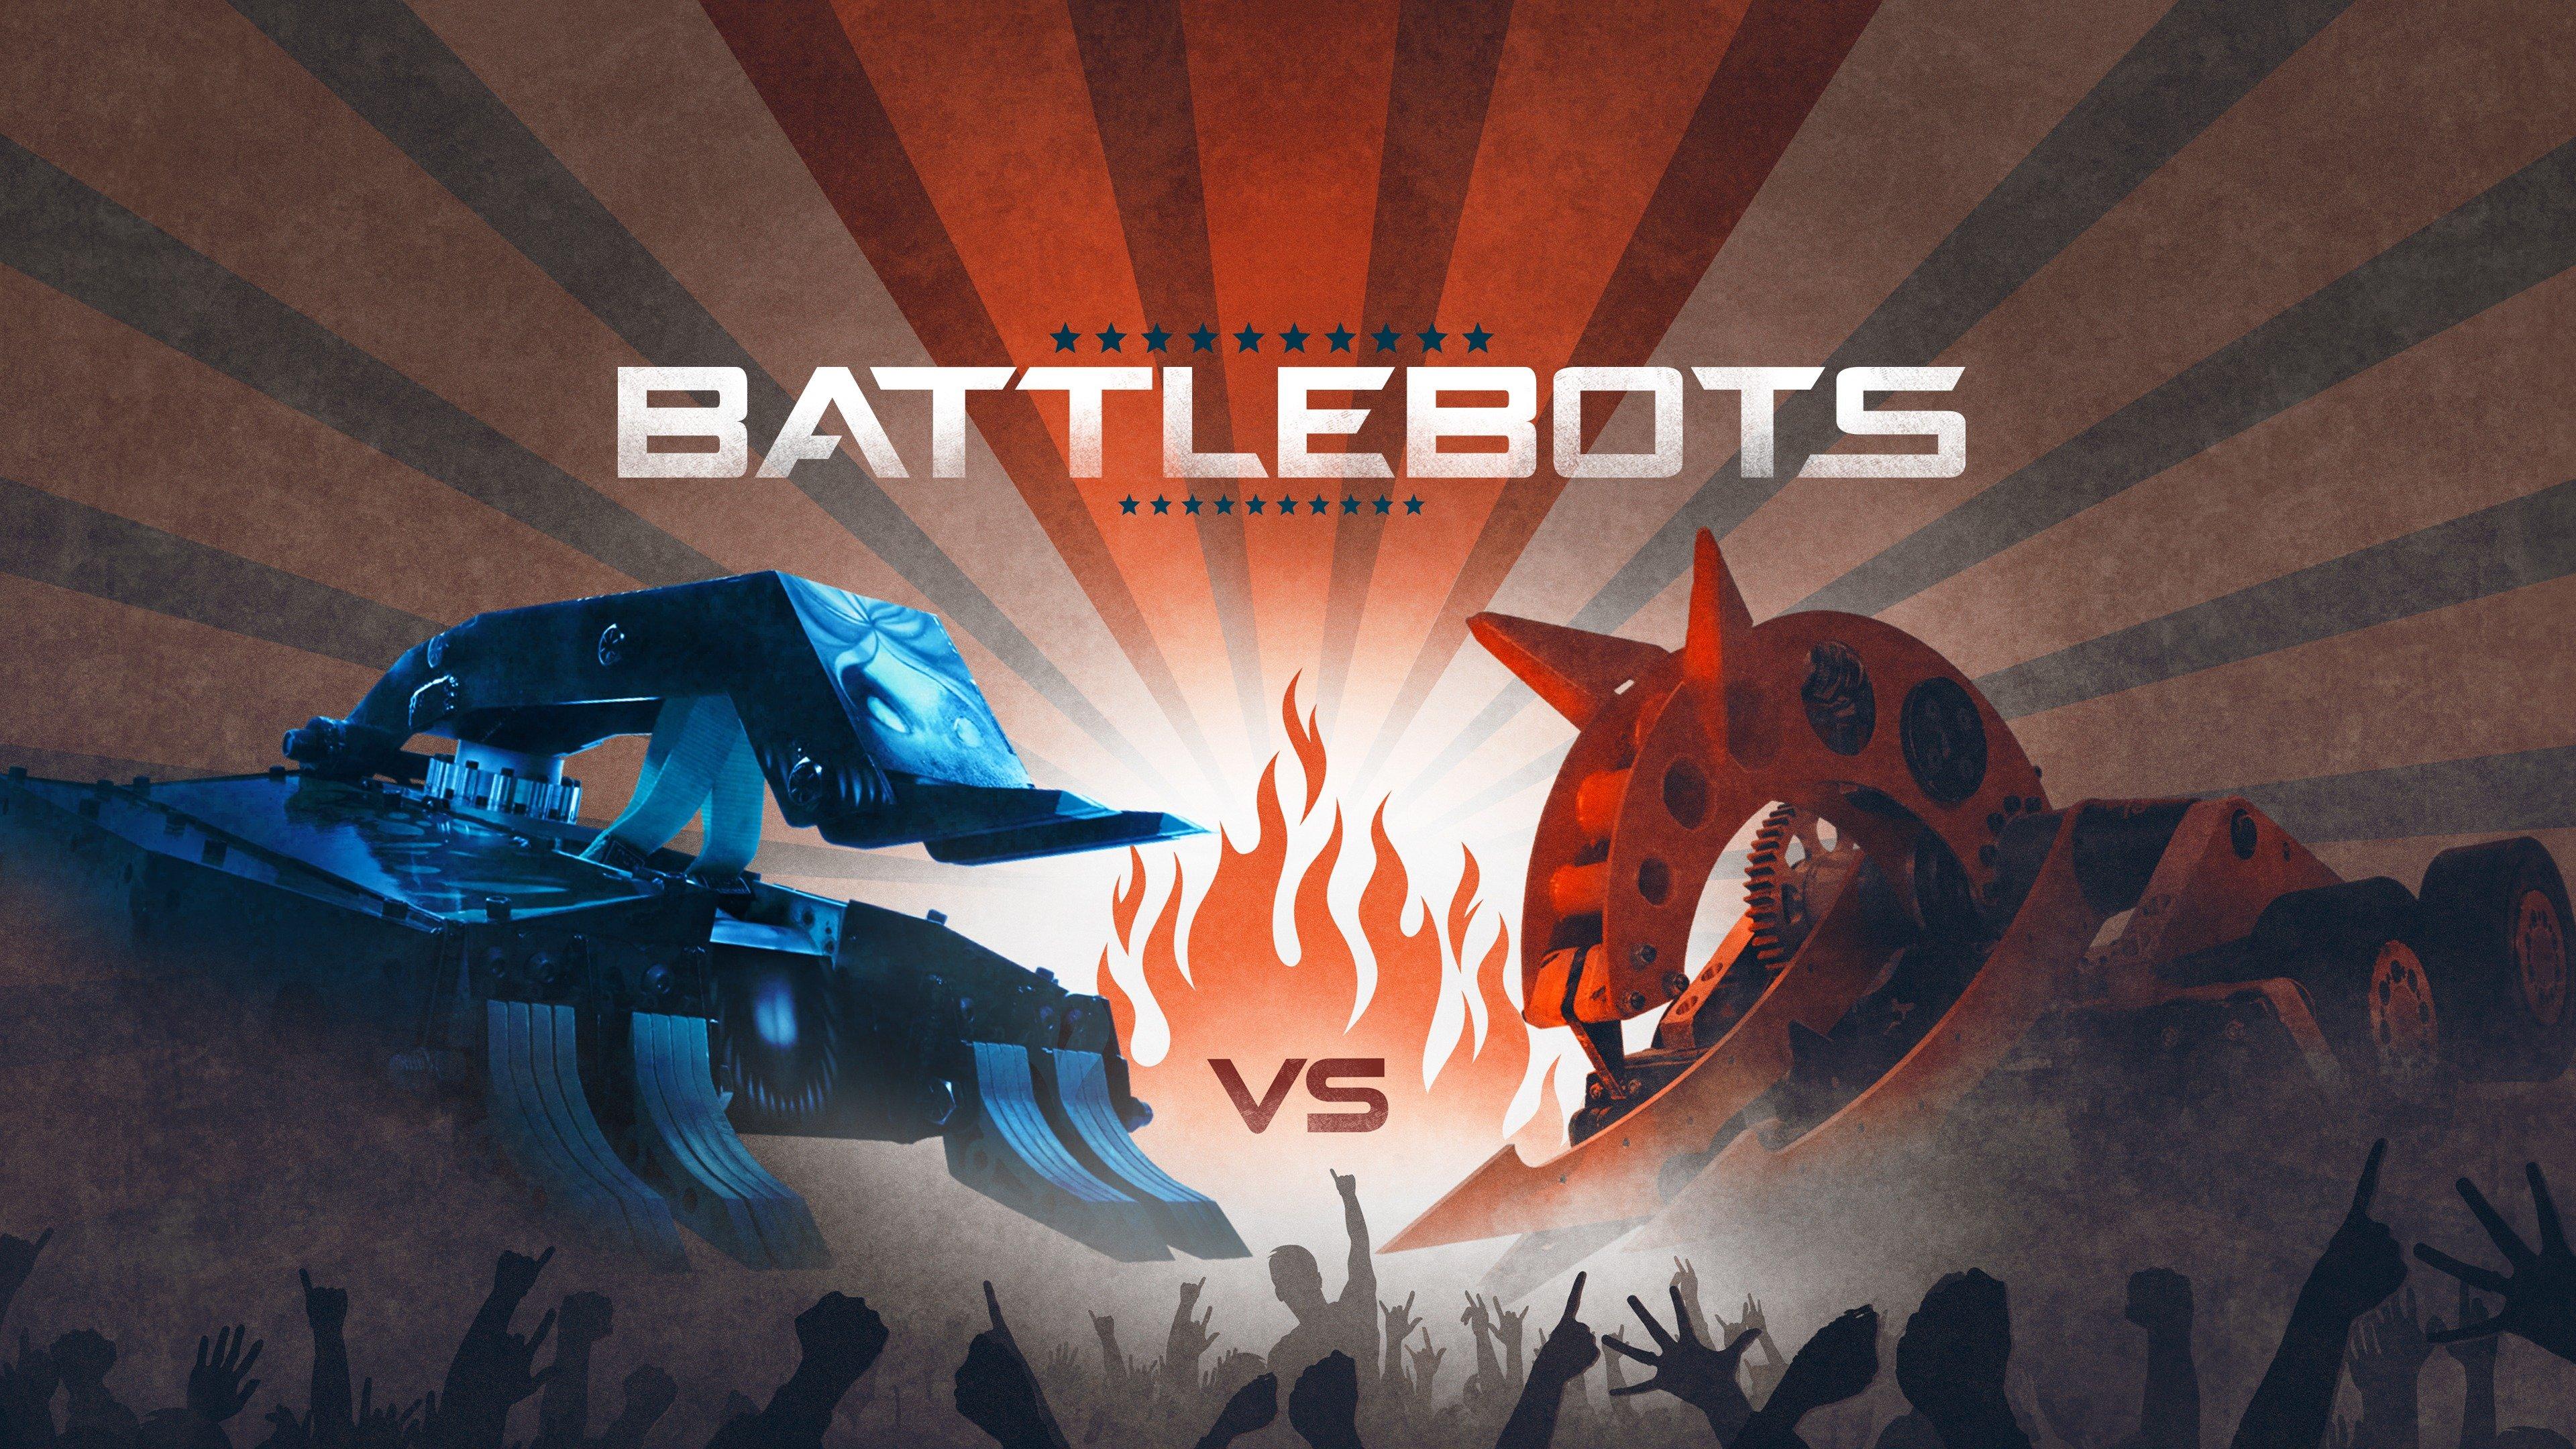 Watch BattleBots Streaming Online on Philo (Free Trial)